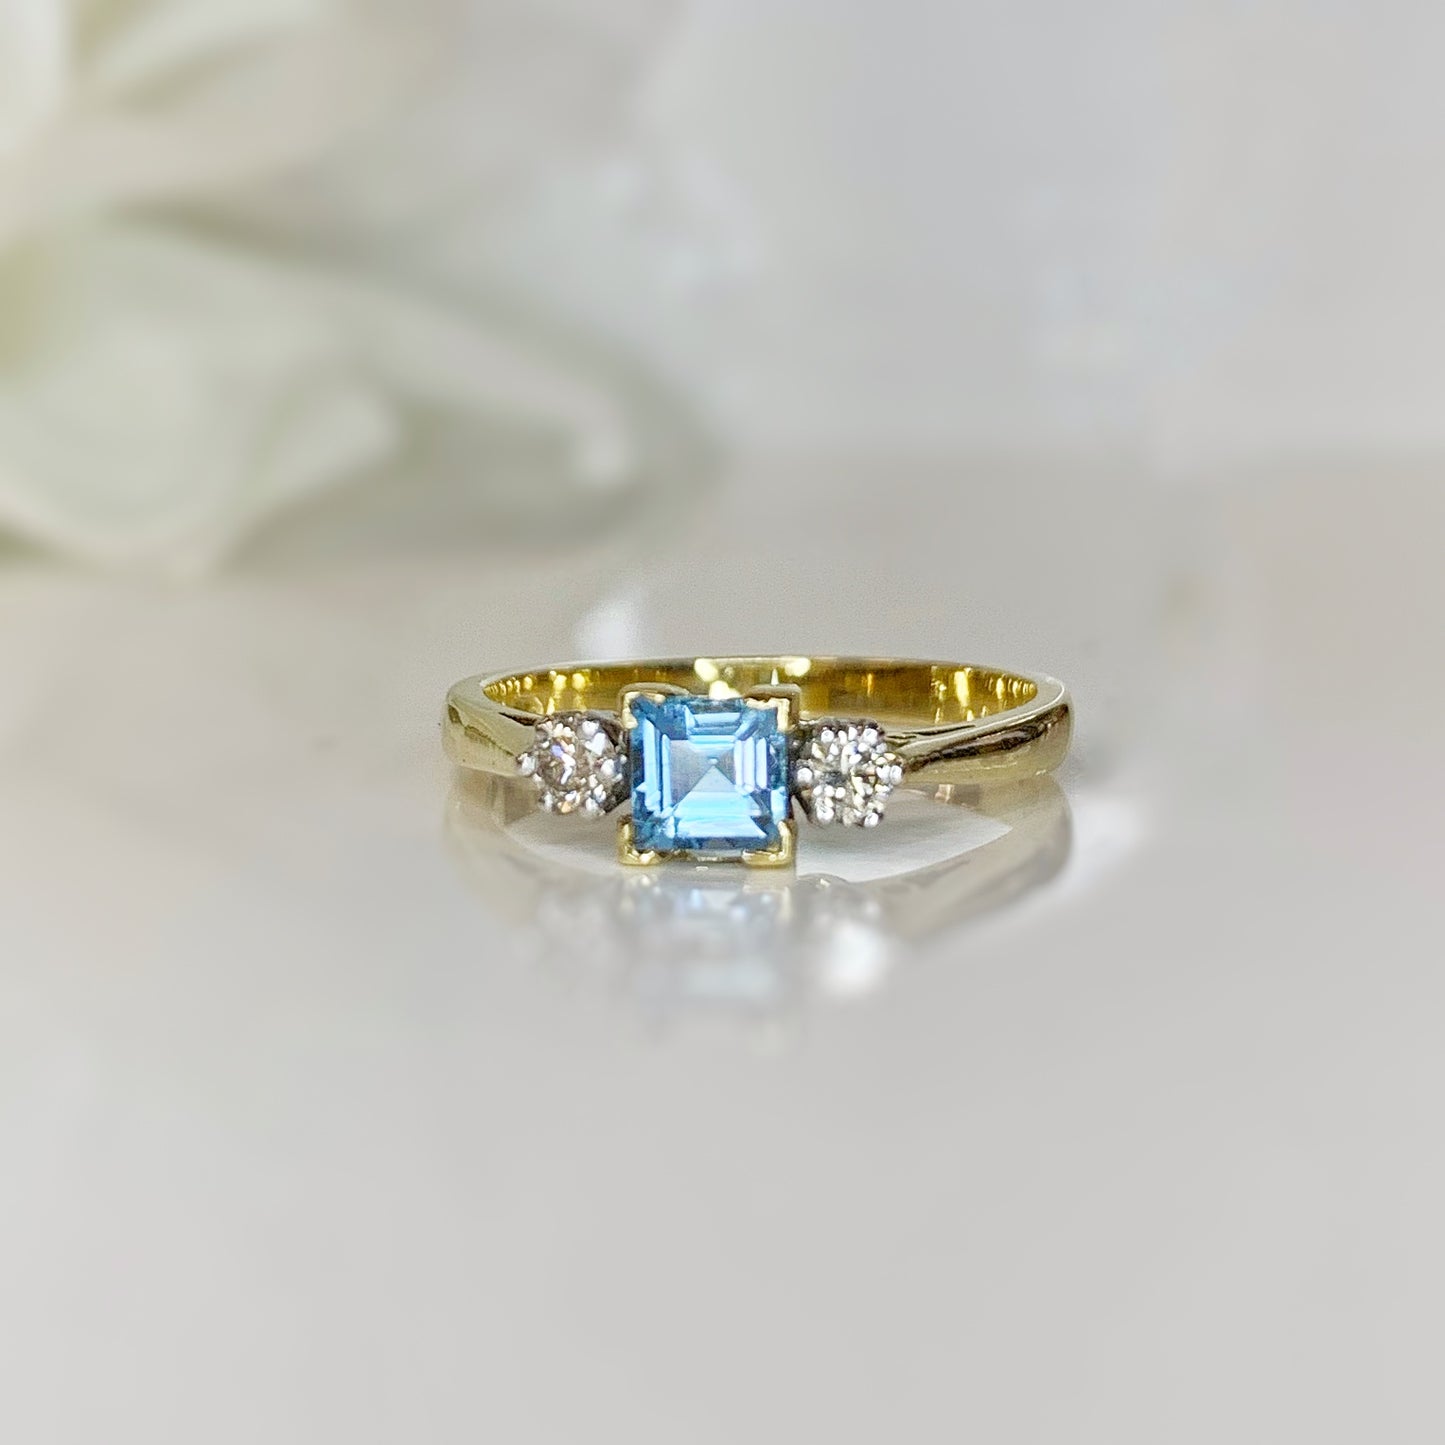 18ct Yellow Gold Vintage Reproduction Blue Topaz and Diamond Ring – SIZE M1/2